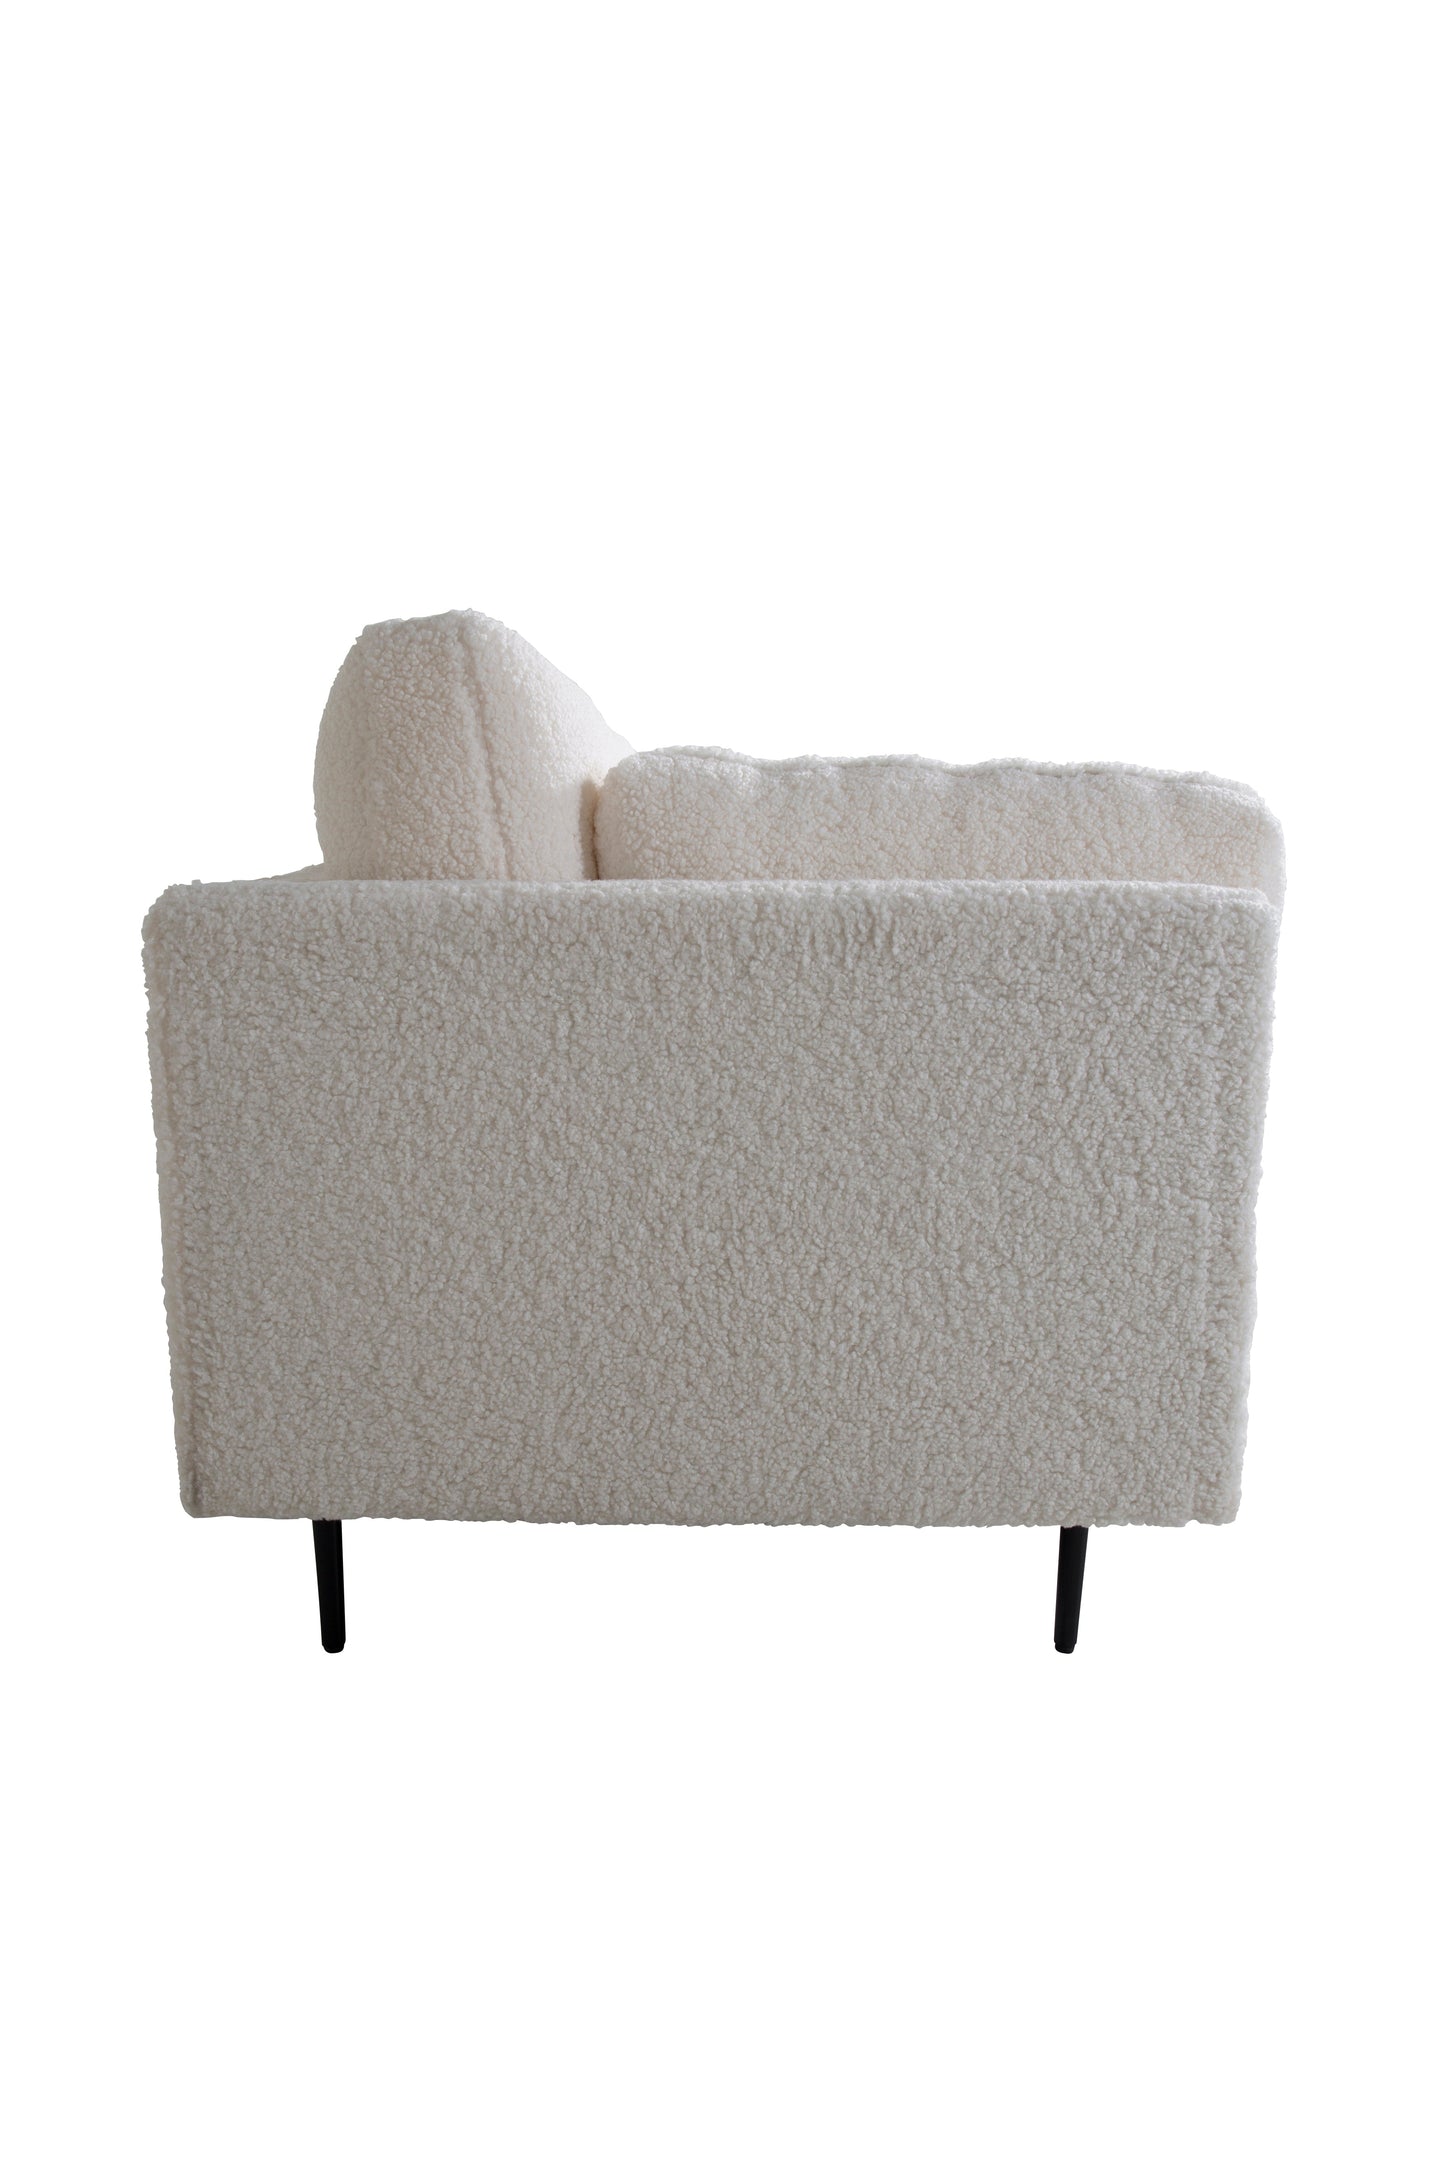 Boom 3 personers sofa - Teddy Stof Hvid / Outlet